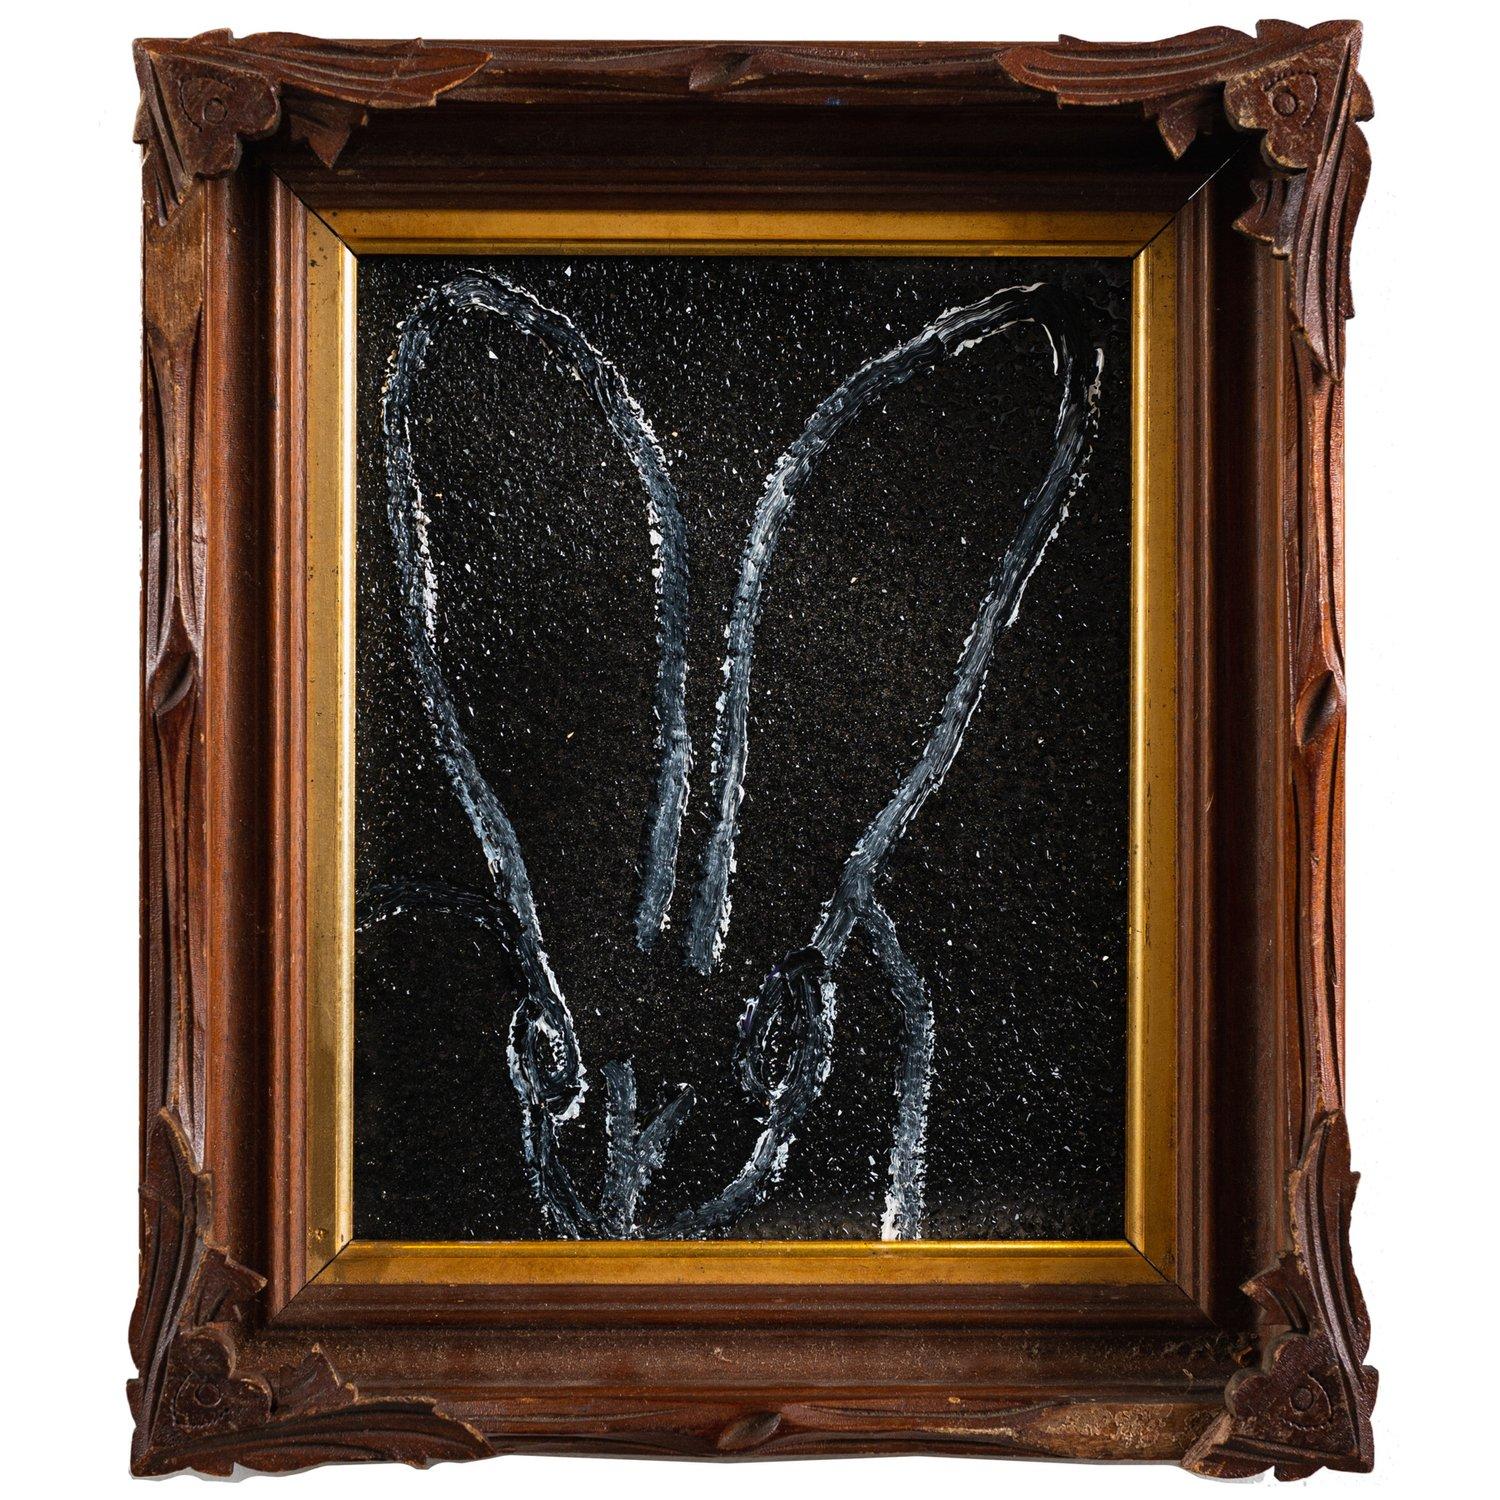 Renowned artist Hunt Slonem's "Nightwatch II" is a 10x8 black background and white rabbit oil painting with diamond dust on wood board of a contemporary abstract rabbit in his choice of antique framing.

*Painting is framed - Please note that not